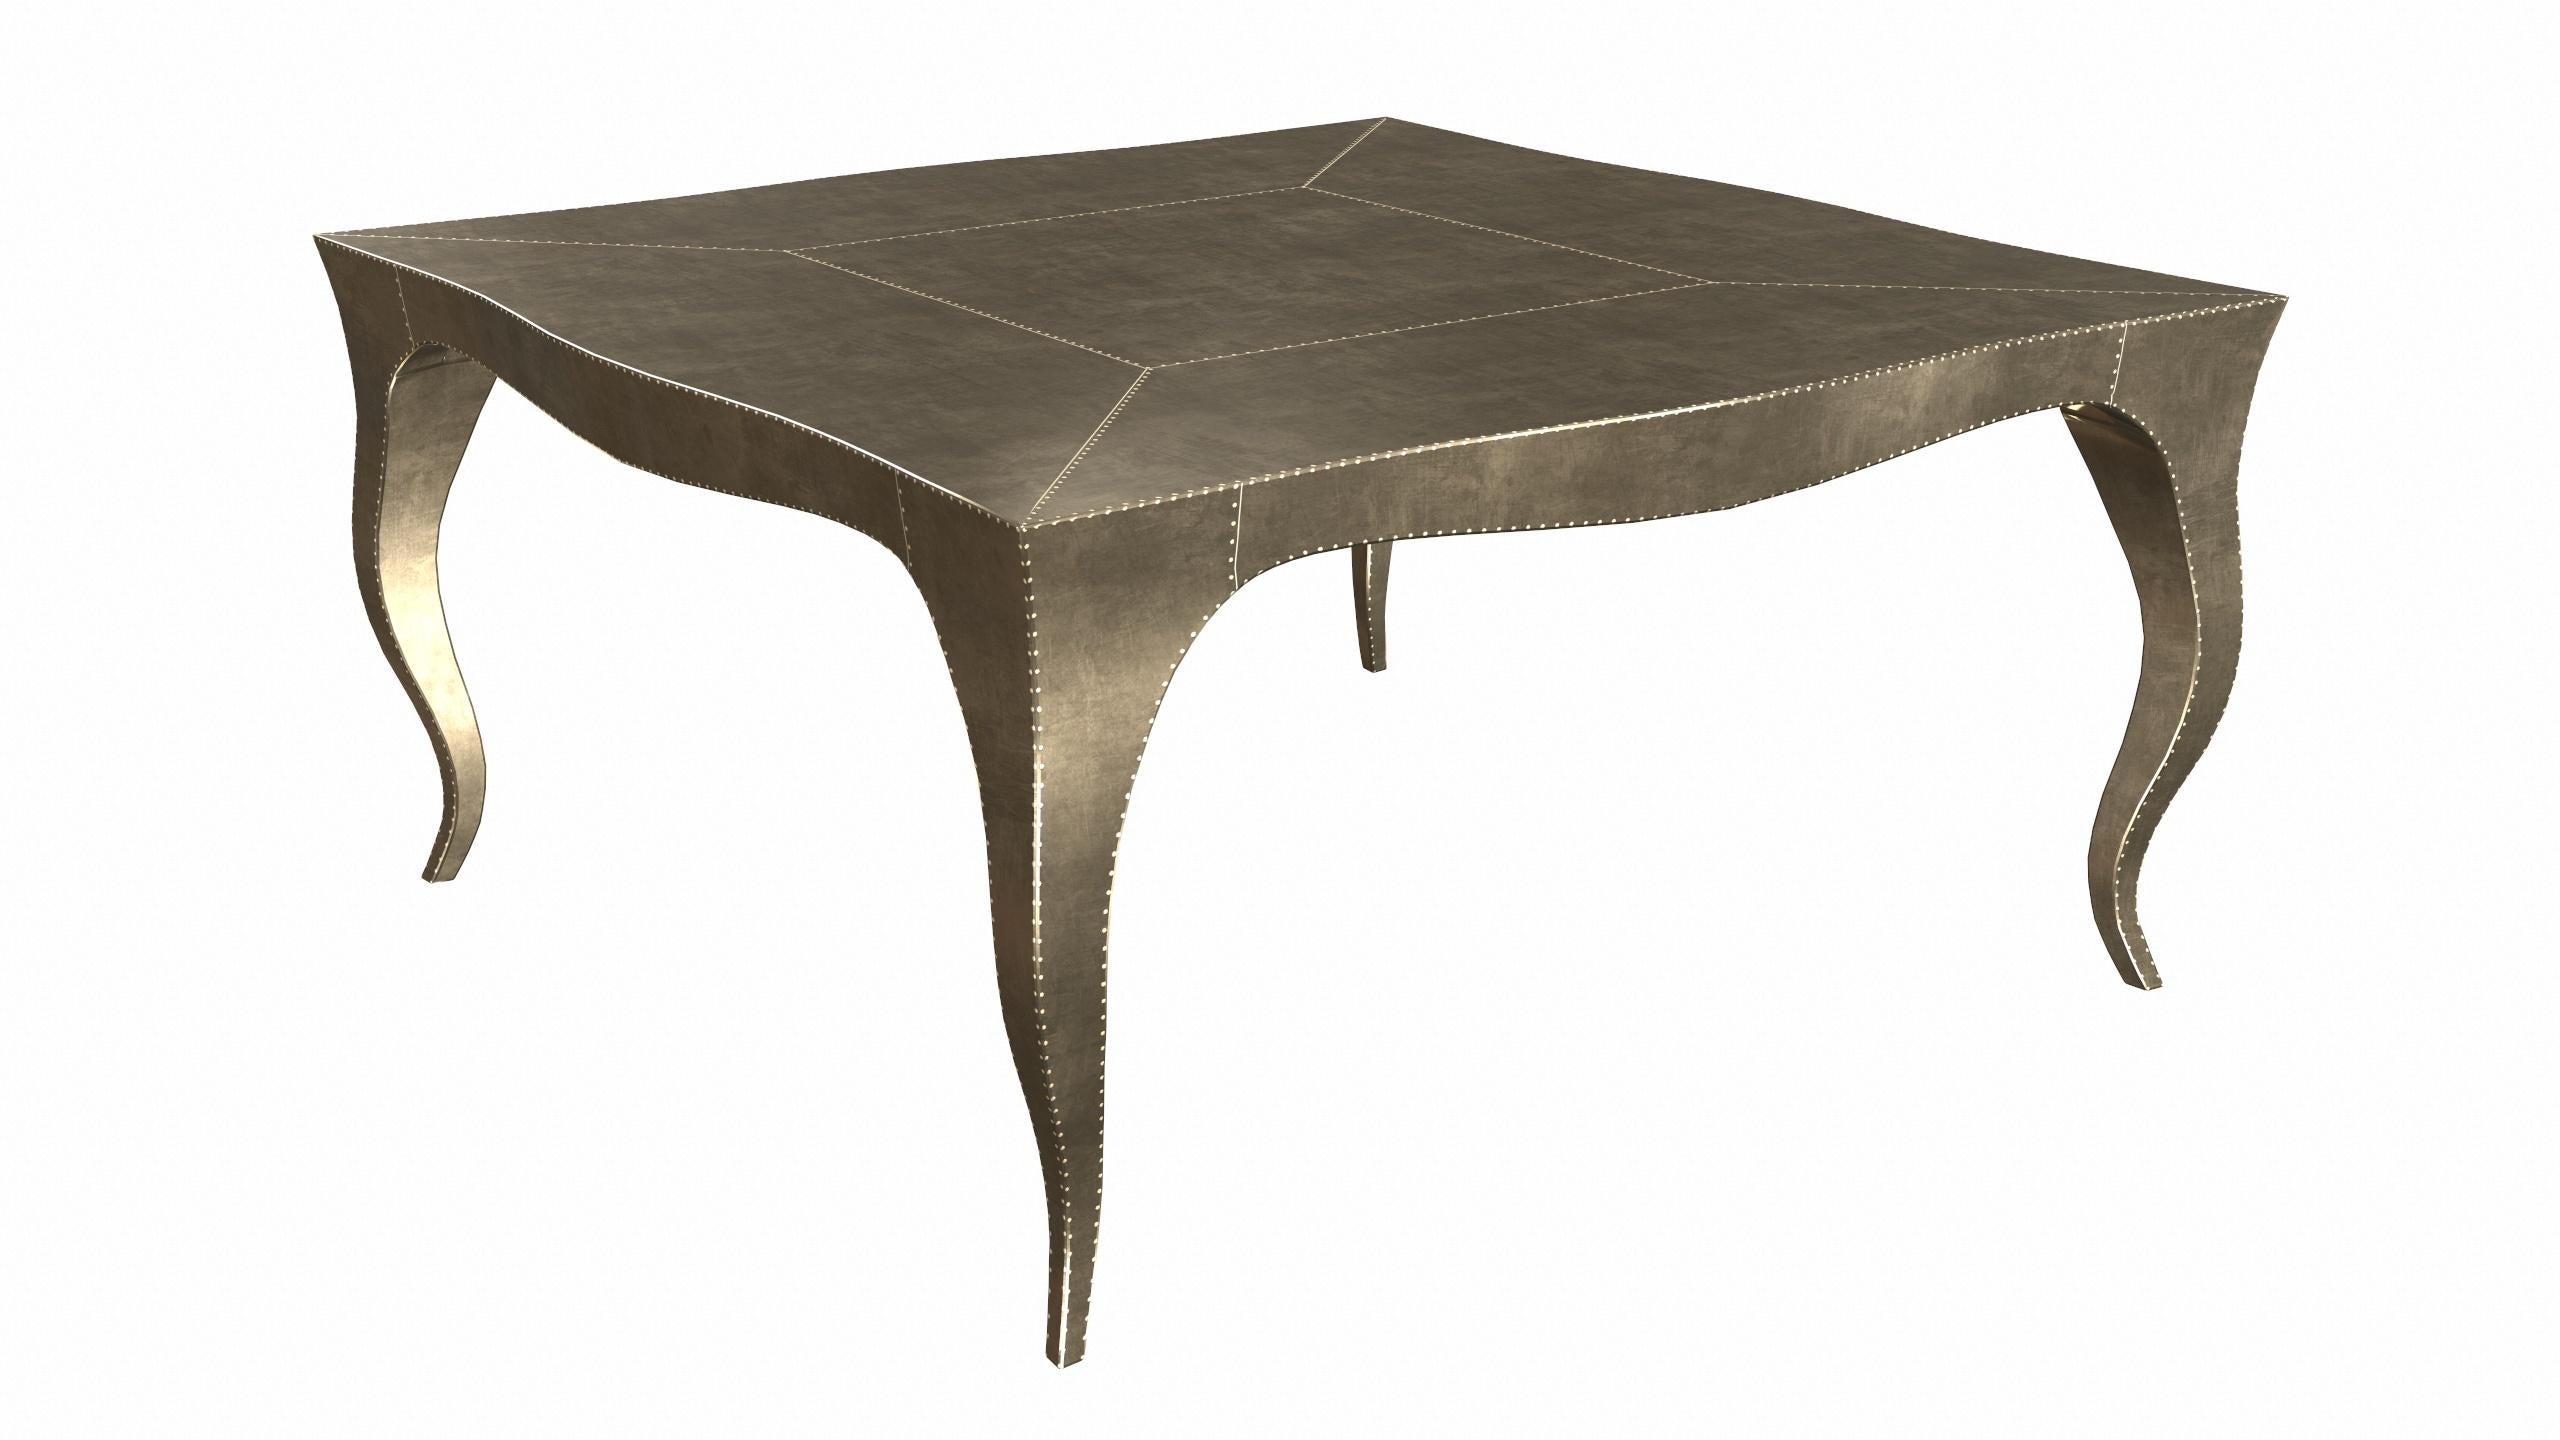 Louise Art Deco Nesting Tables Smooth Brass 18.5x18.5x10 inch by Paul M. Neuf - En vente à New York, NY